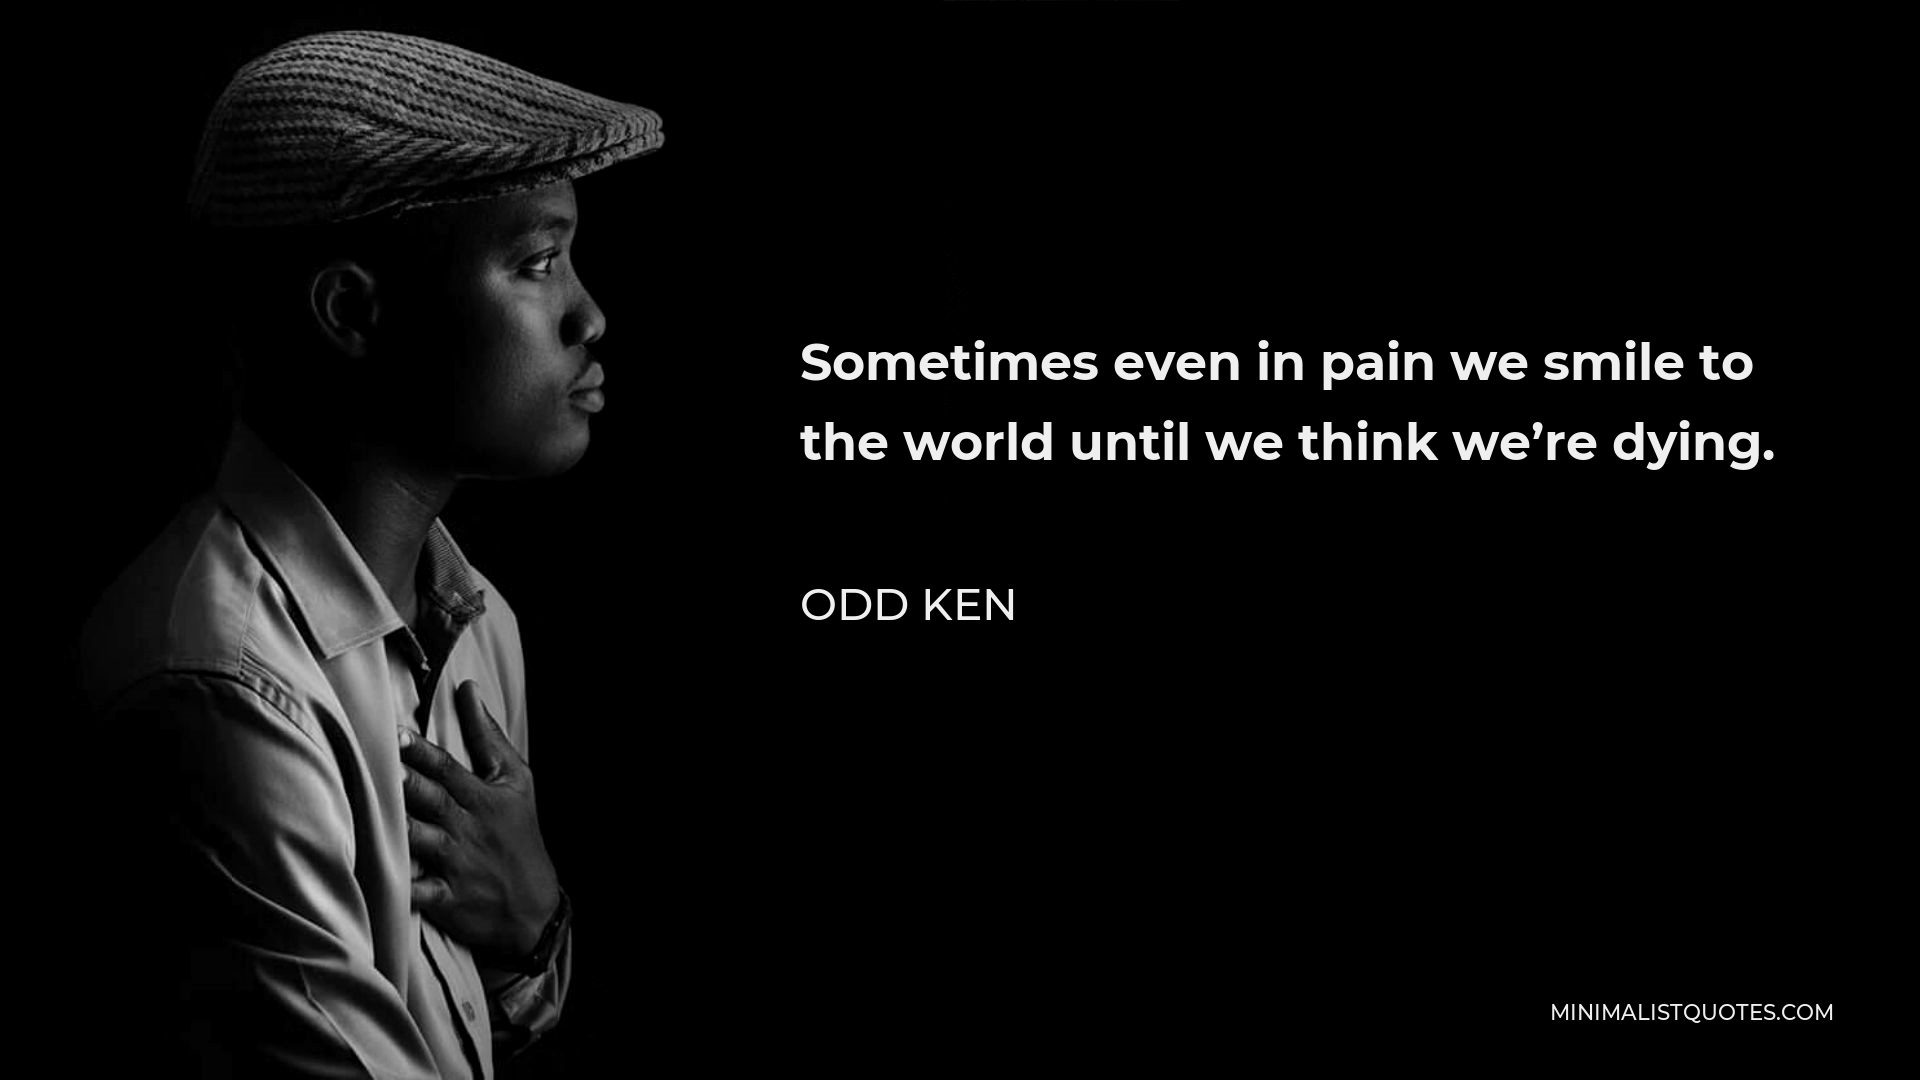 Odd Ken Quote - Sometimes even in pain we smile to the world until we think we’re dying.